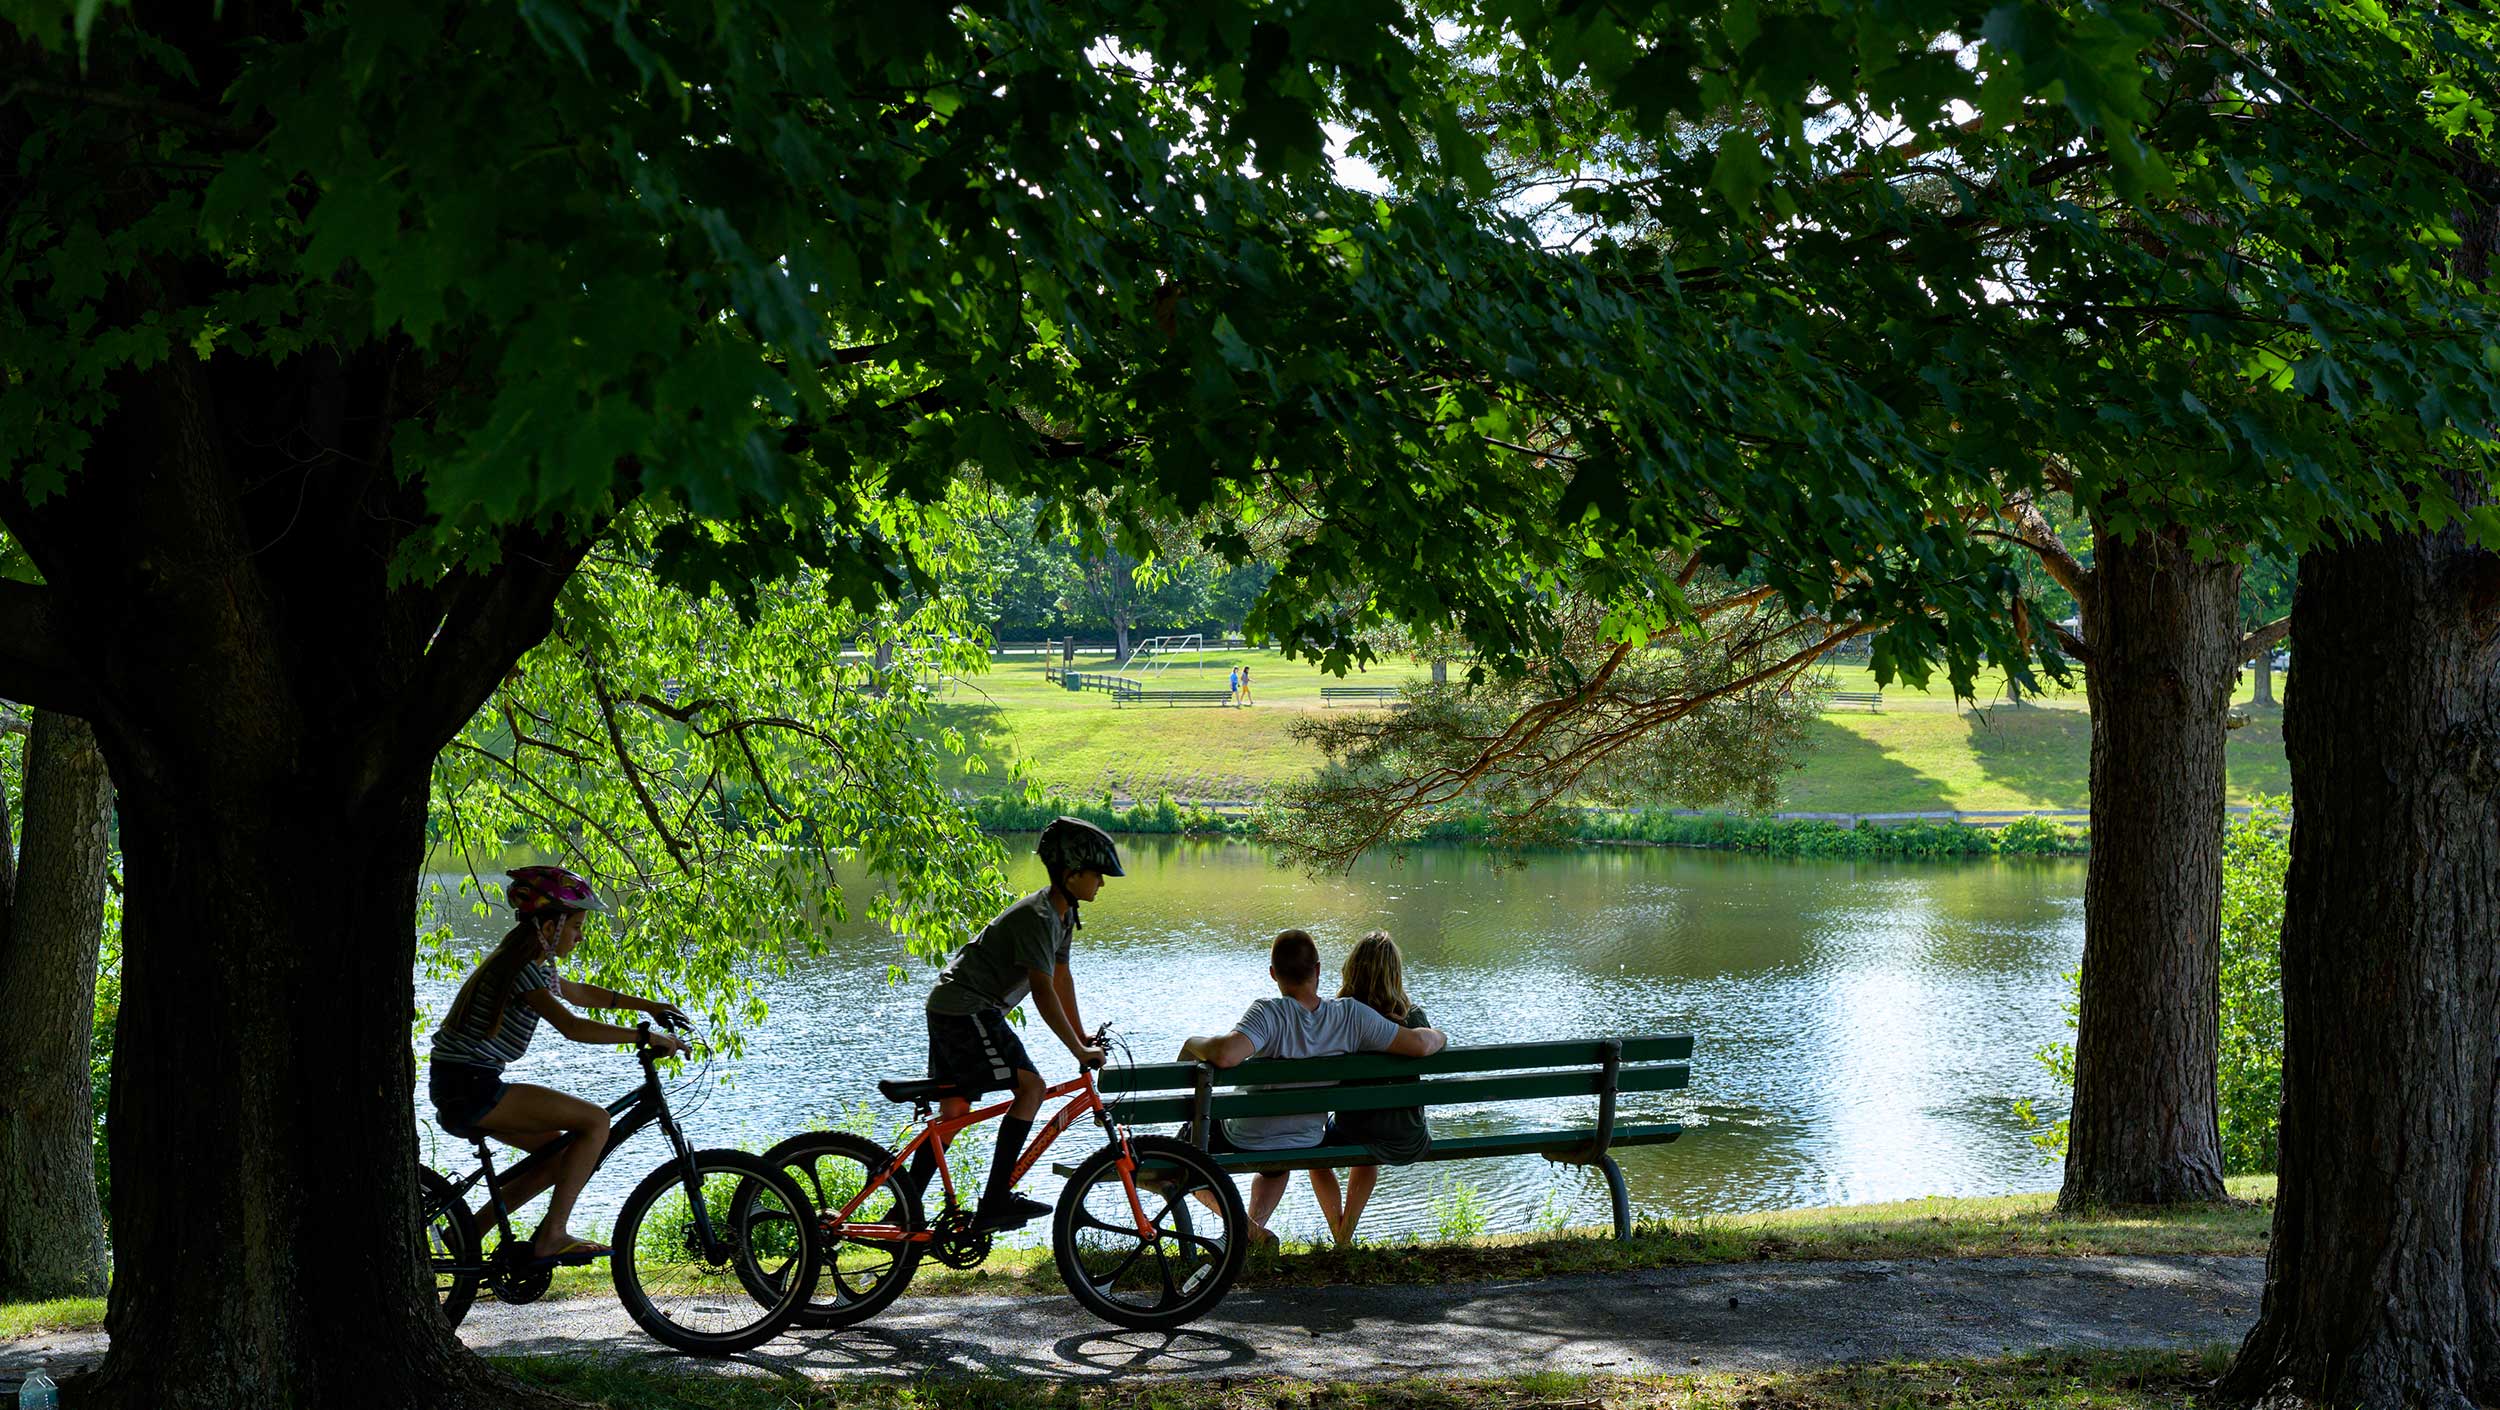 Two kids riding bicycles, near two people sitting on a park bench